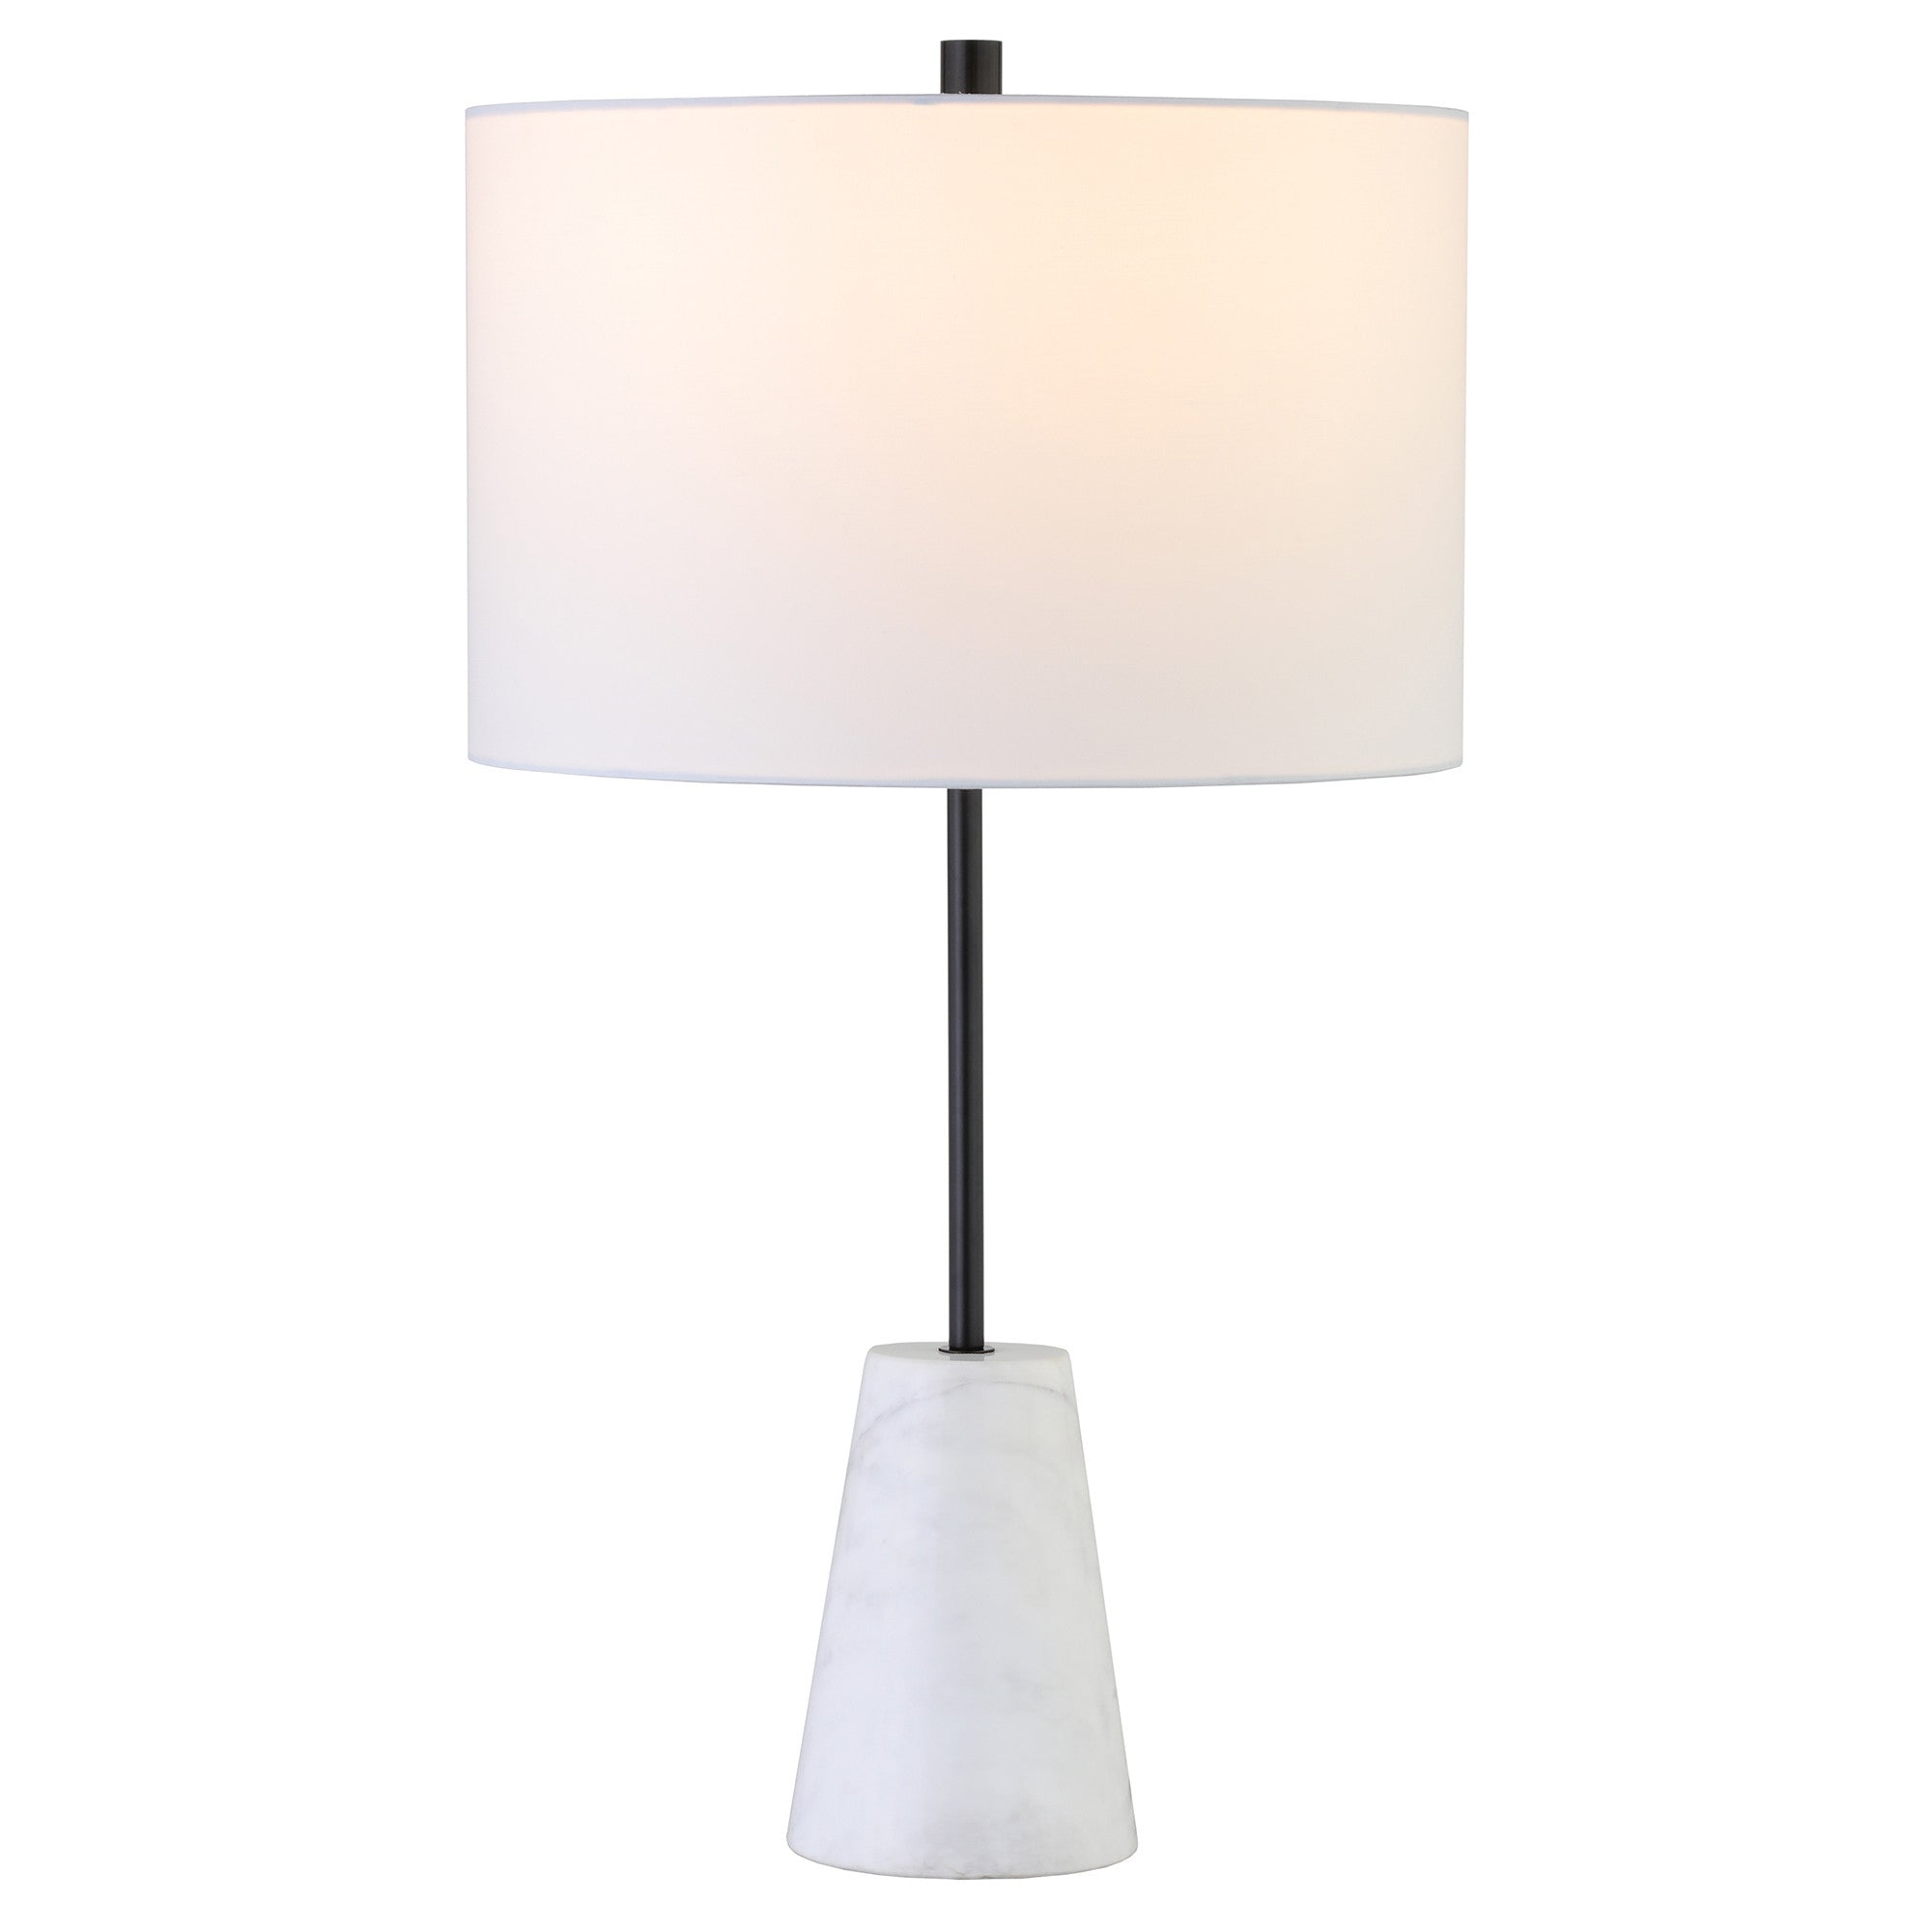 26" Black and White Marble Table Lamp With White Drum Shade